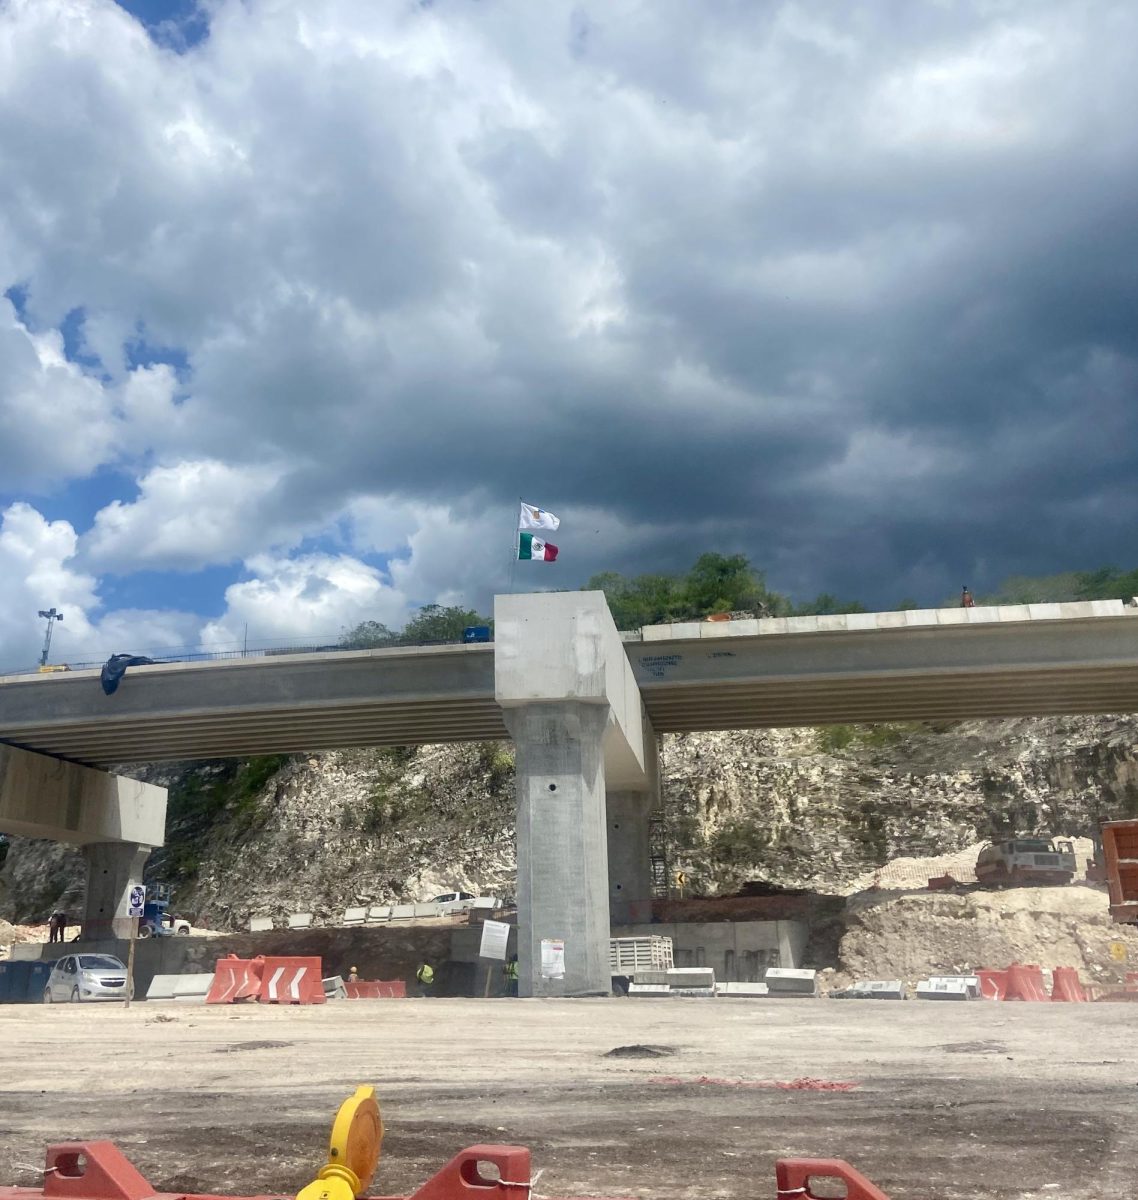 The Maya Train under construction in Campeche, Mexico. One of the stations in the route.